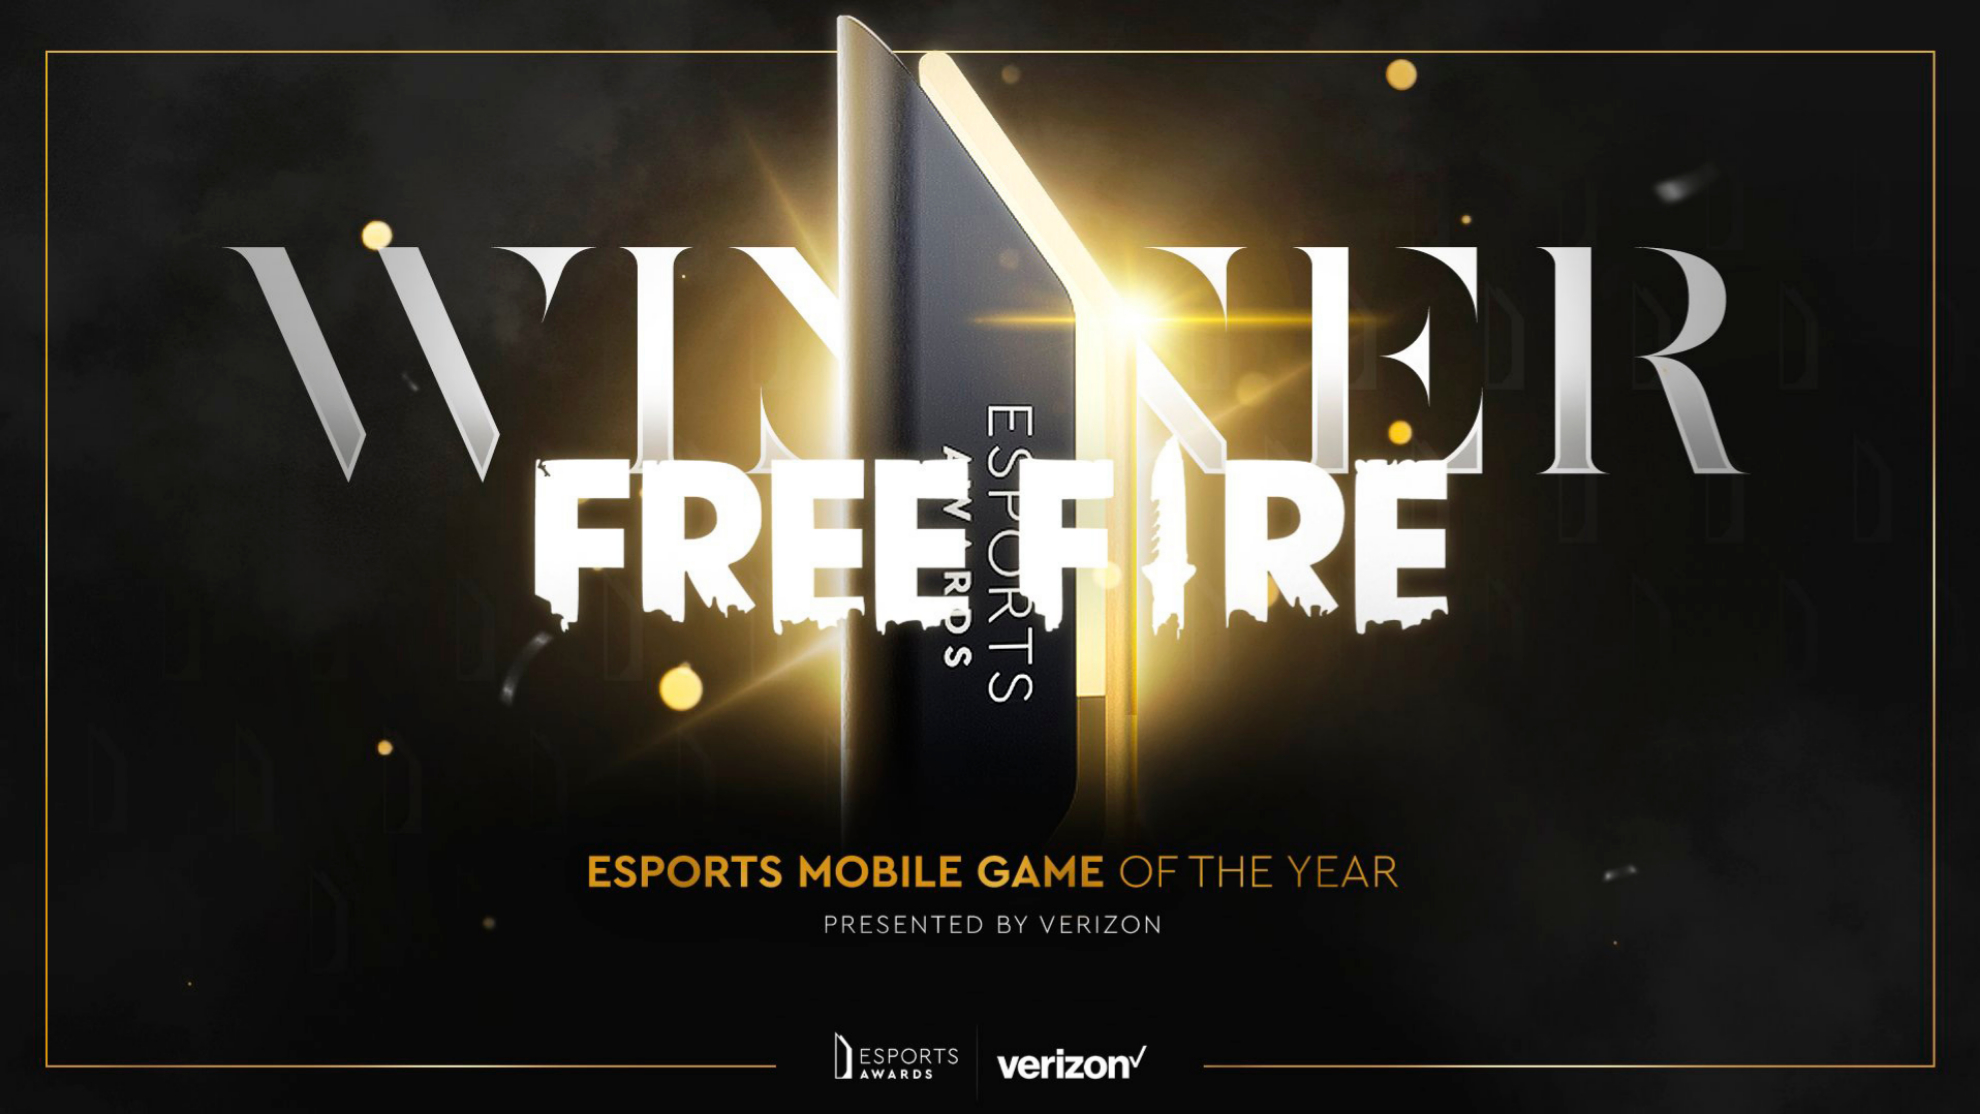 Free Fire Esports Mobile Game of the Year